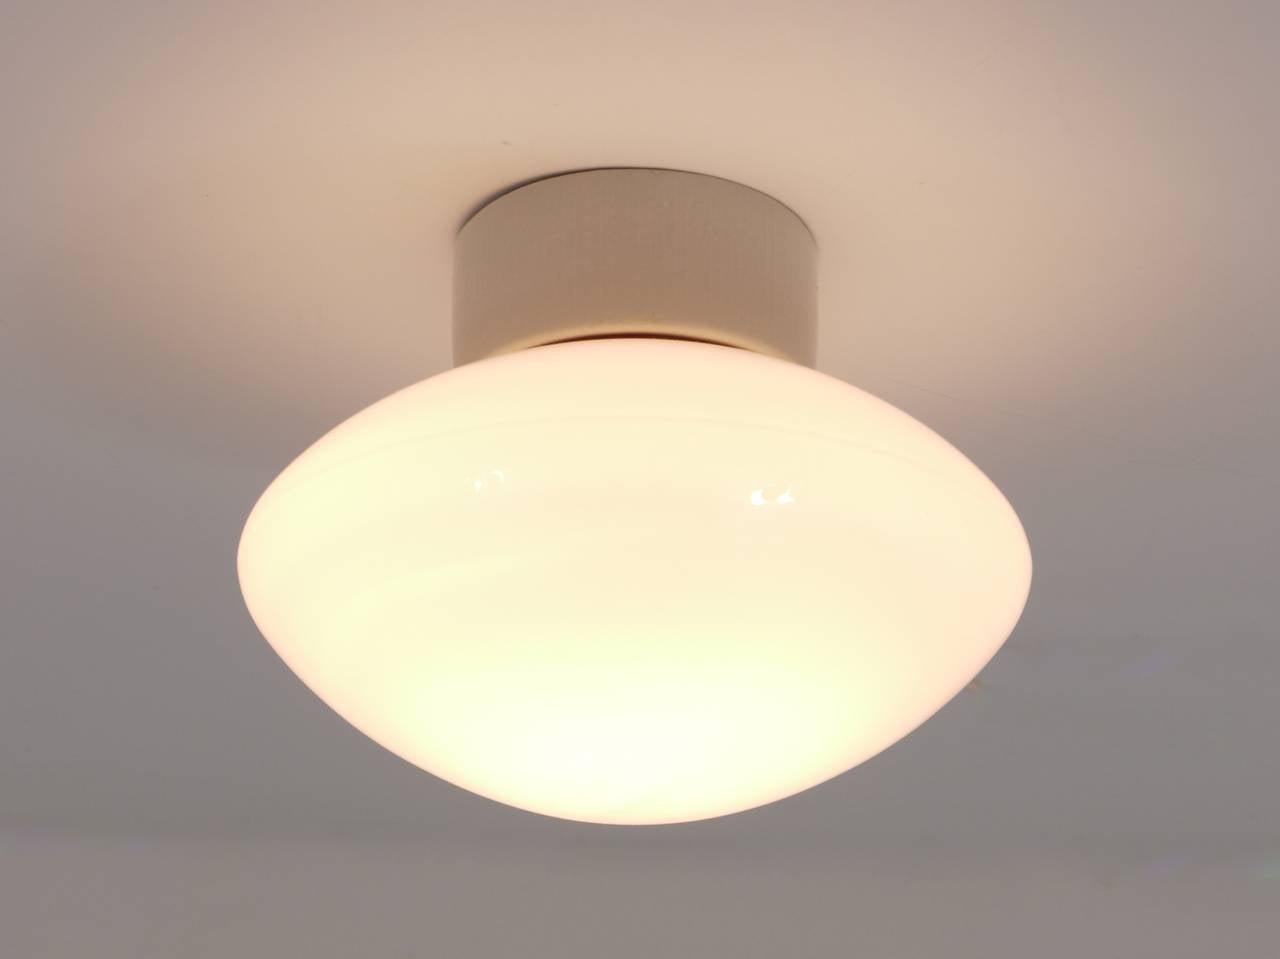 A beautiful German Bauhaus lamp, to use as ceiling lamp or sconce from the 1940s. Designed by Prof. Wilhelm Wagenfeld, executed by Lindner/Bamberg. Has a white porcelain base and a nice shaped opal glass lampshade. In very good condition.